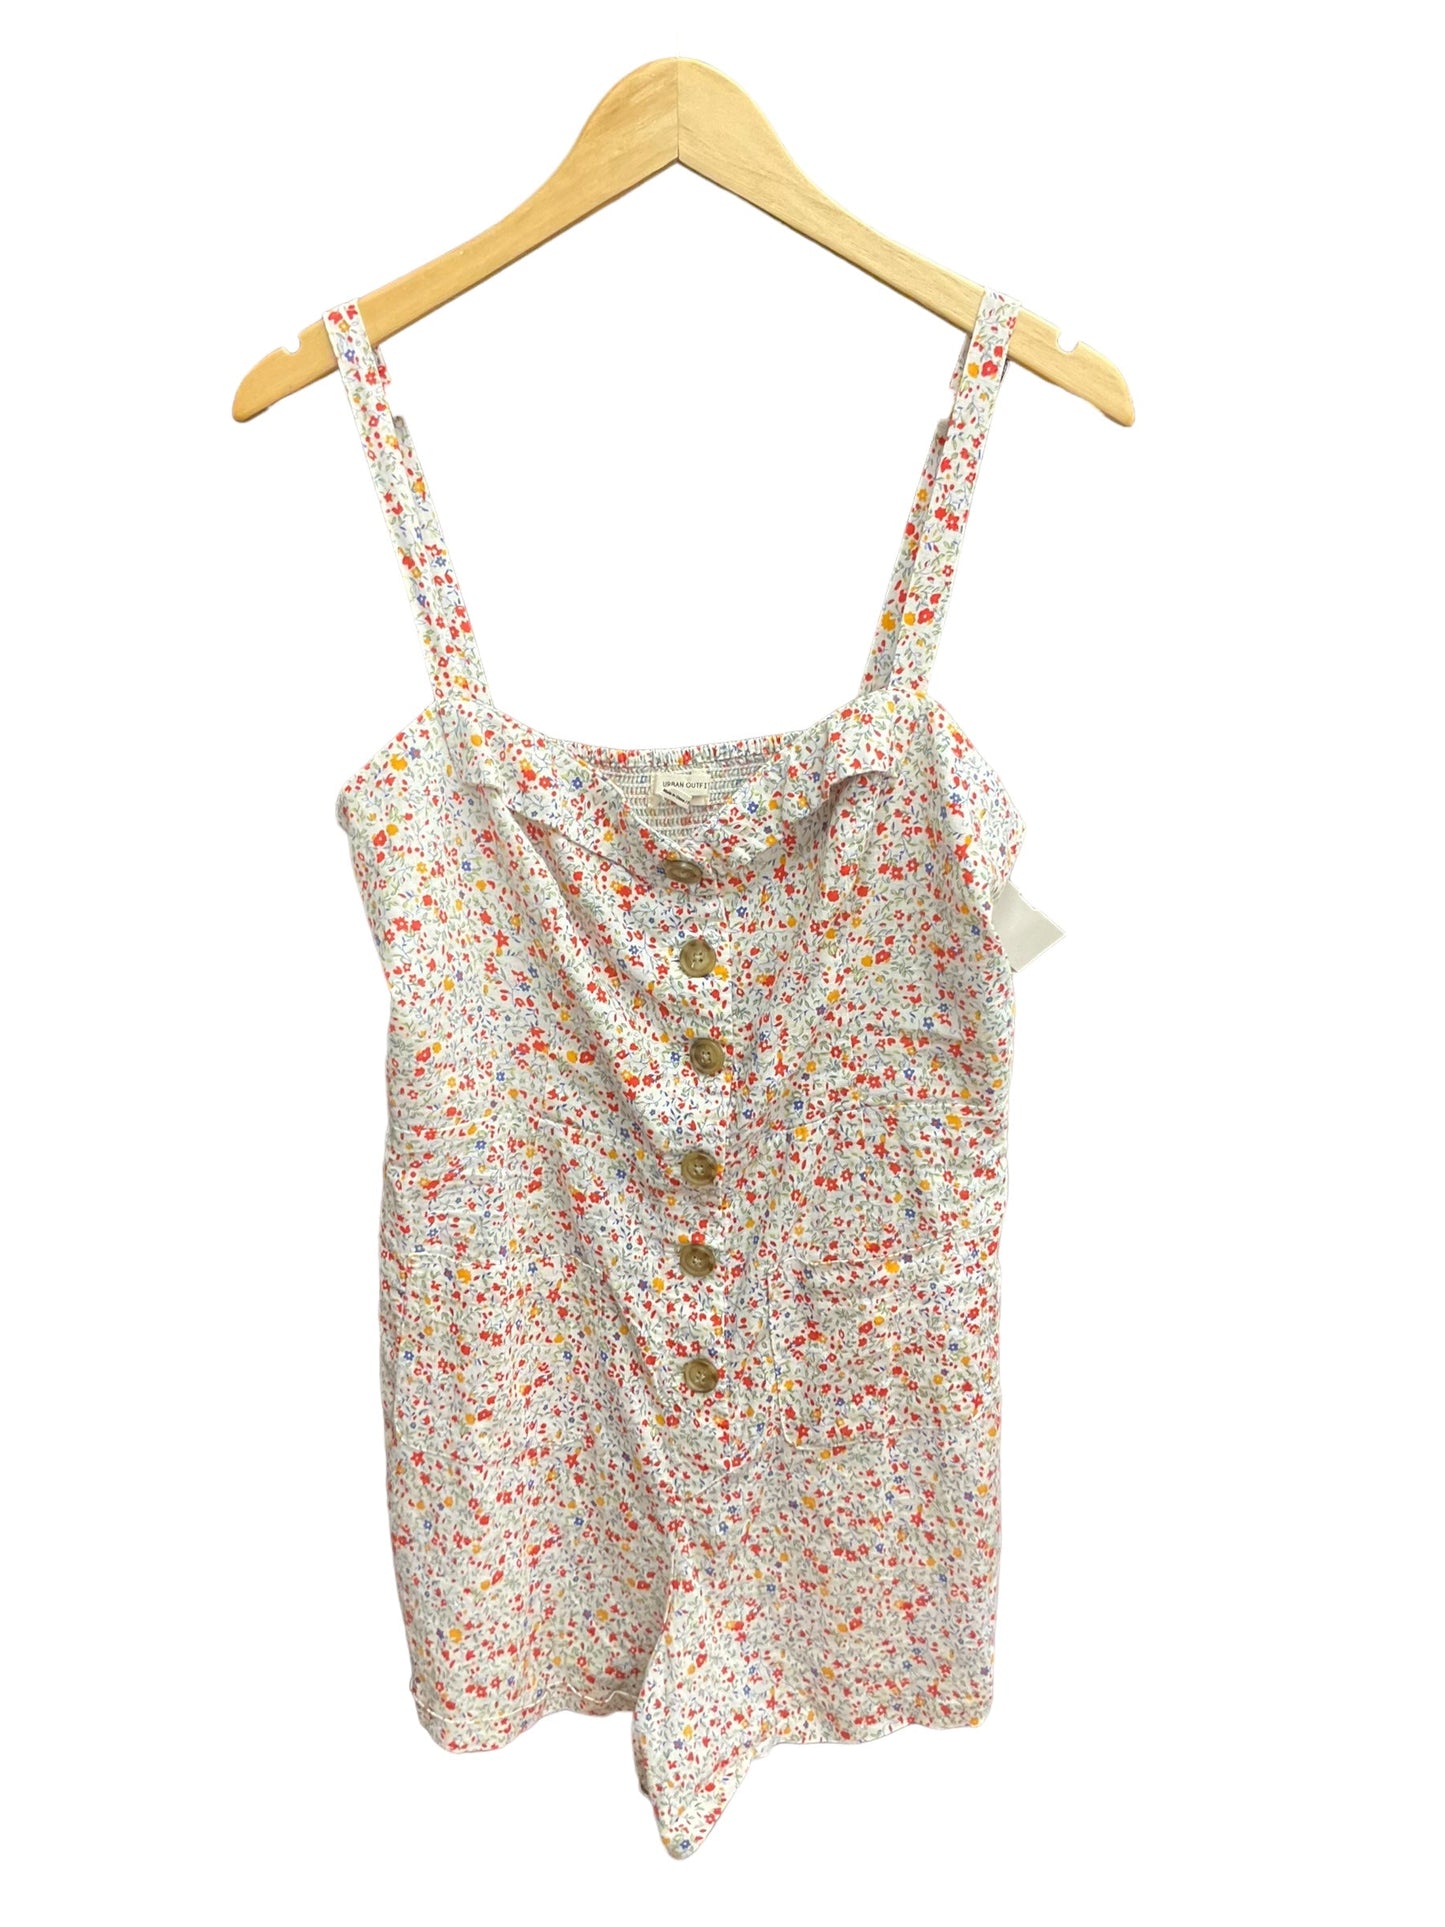 Floral Print Romper Urban Outfitters, Size L